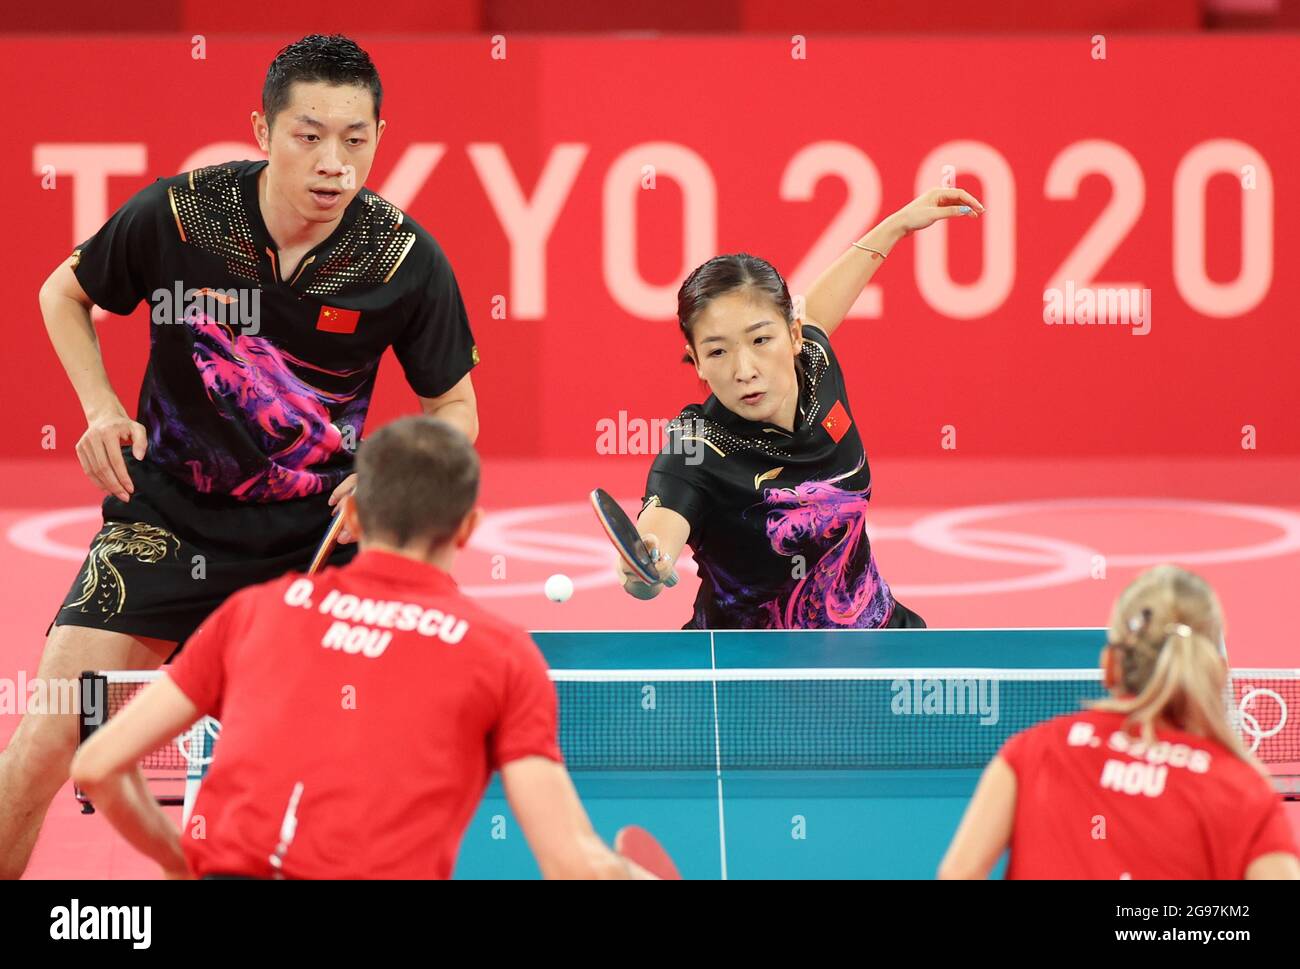 Tokyo, Japan. 25th July, 2021. Xu Xin (L, top)/Liu Shiwen (R, top) of China  compete during table tennis mixed doubles quarterfinal against Ovidiu  Ionescu/Bernadette Szocs of Romania at the Tokyo 2020 Olympic